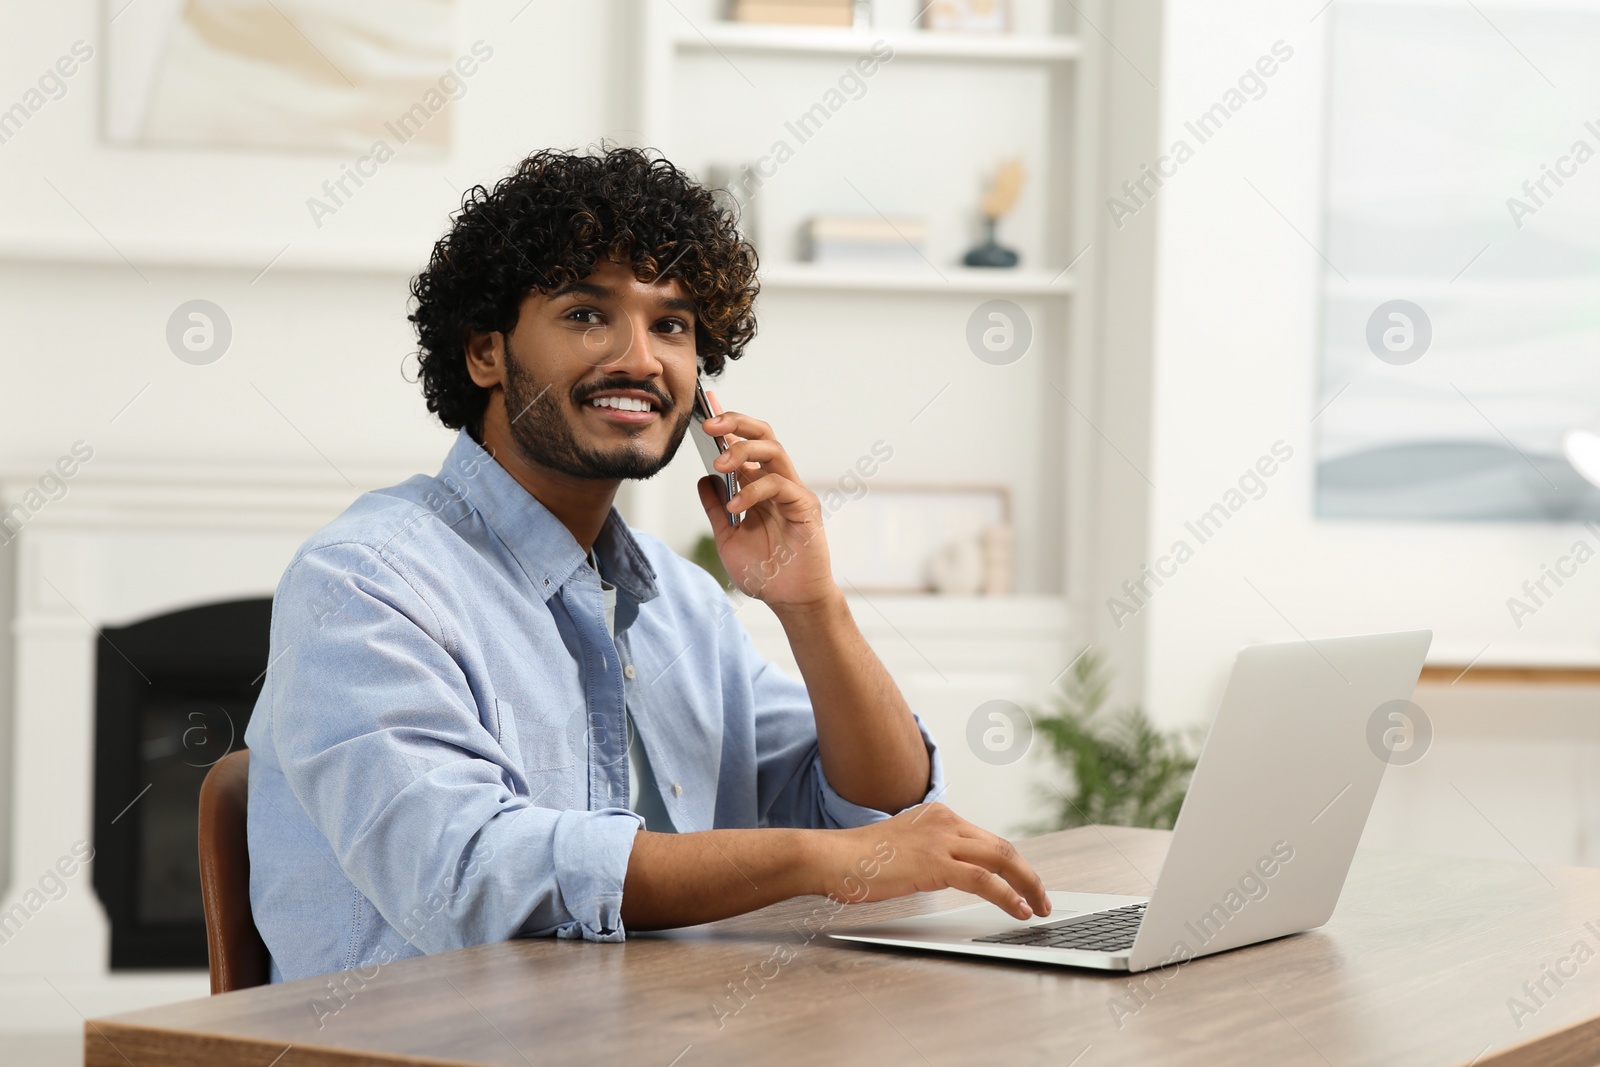 Photo of Handsome smiling man talking on smartphone in room, space for text